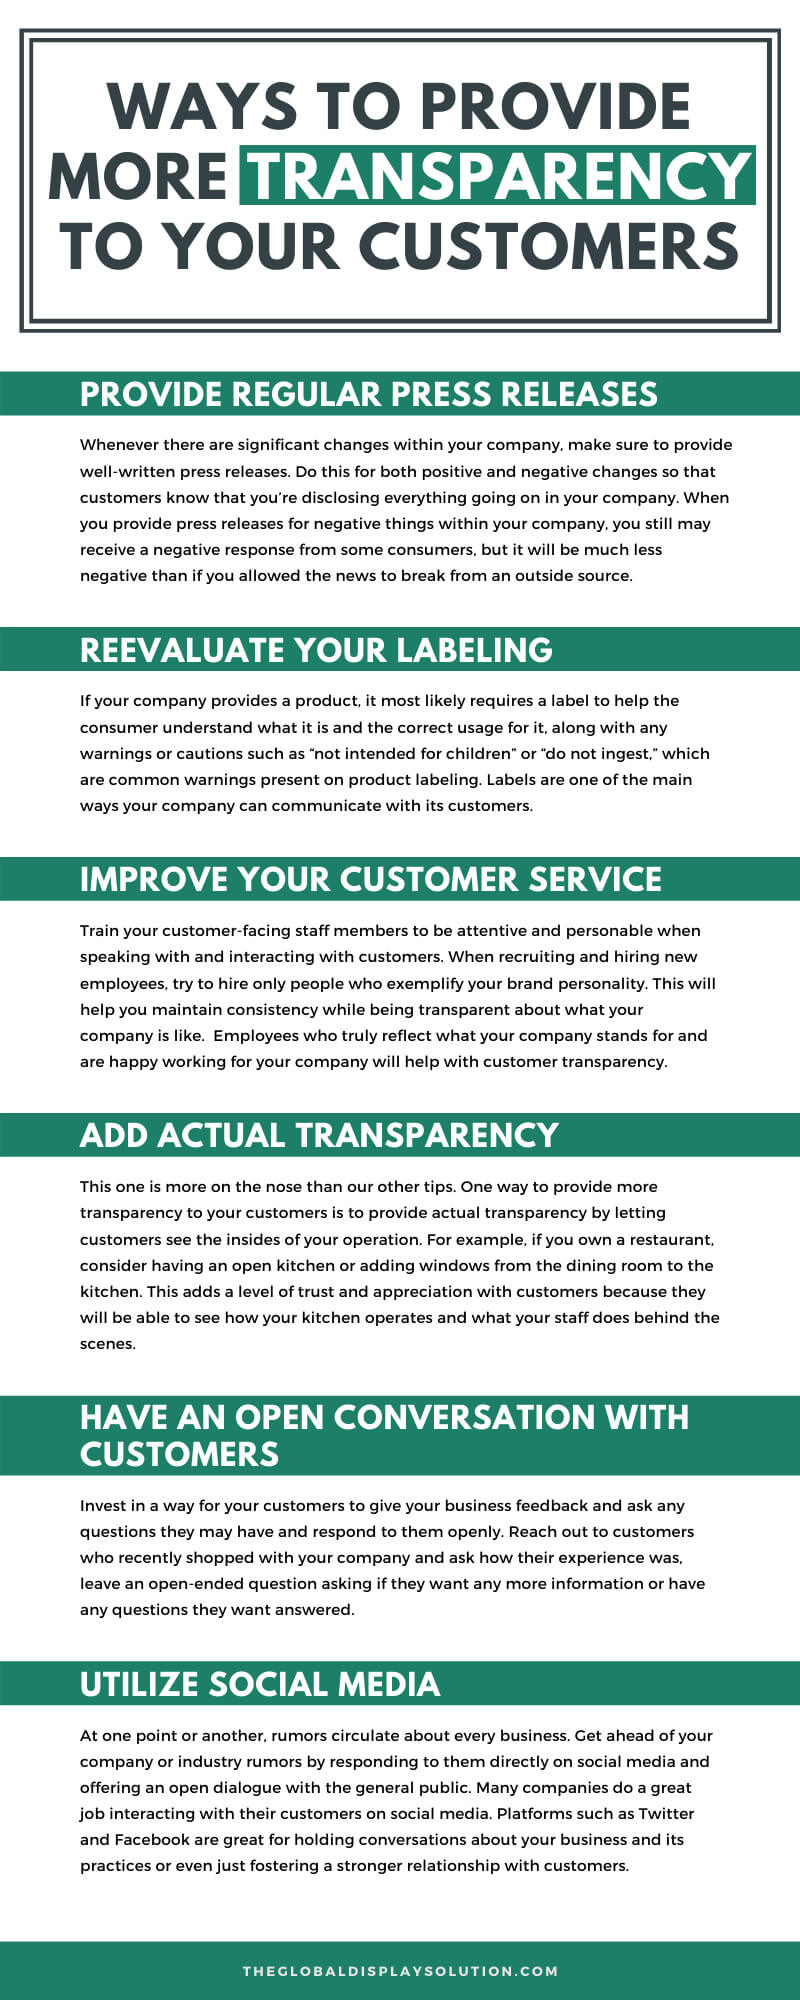 Ways to Provide More Transparency to Your Customers